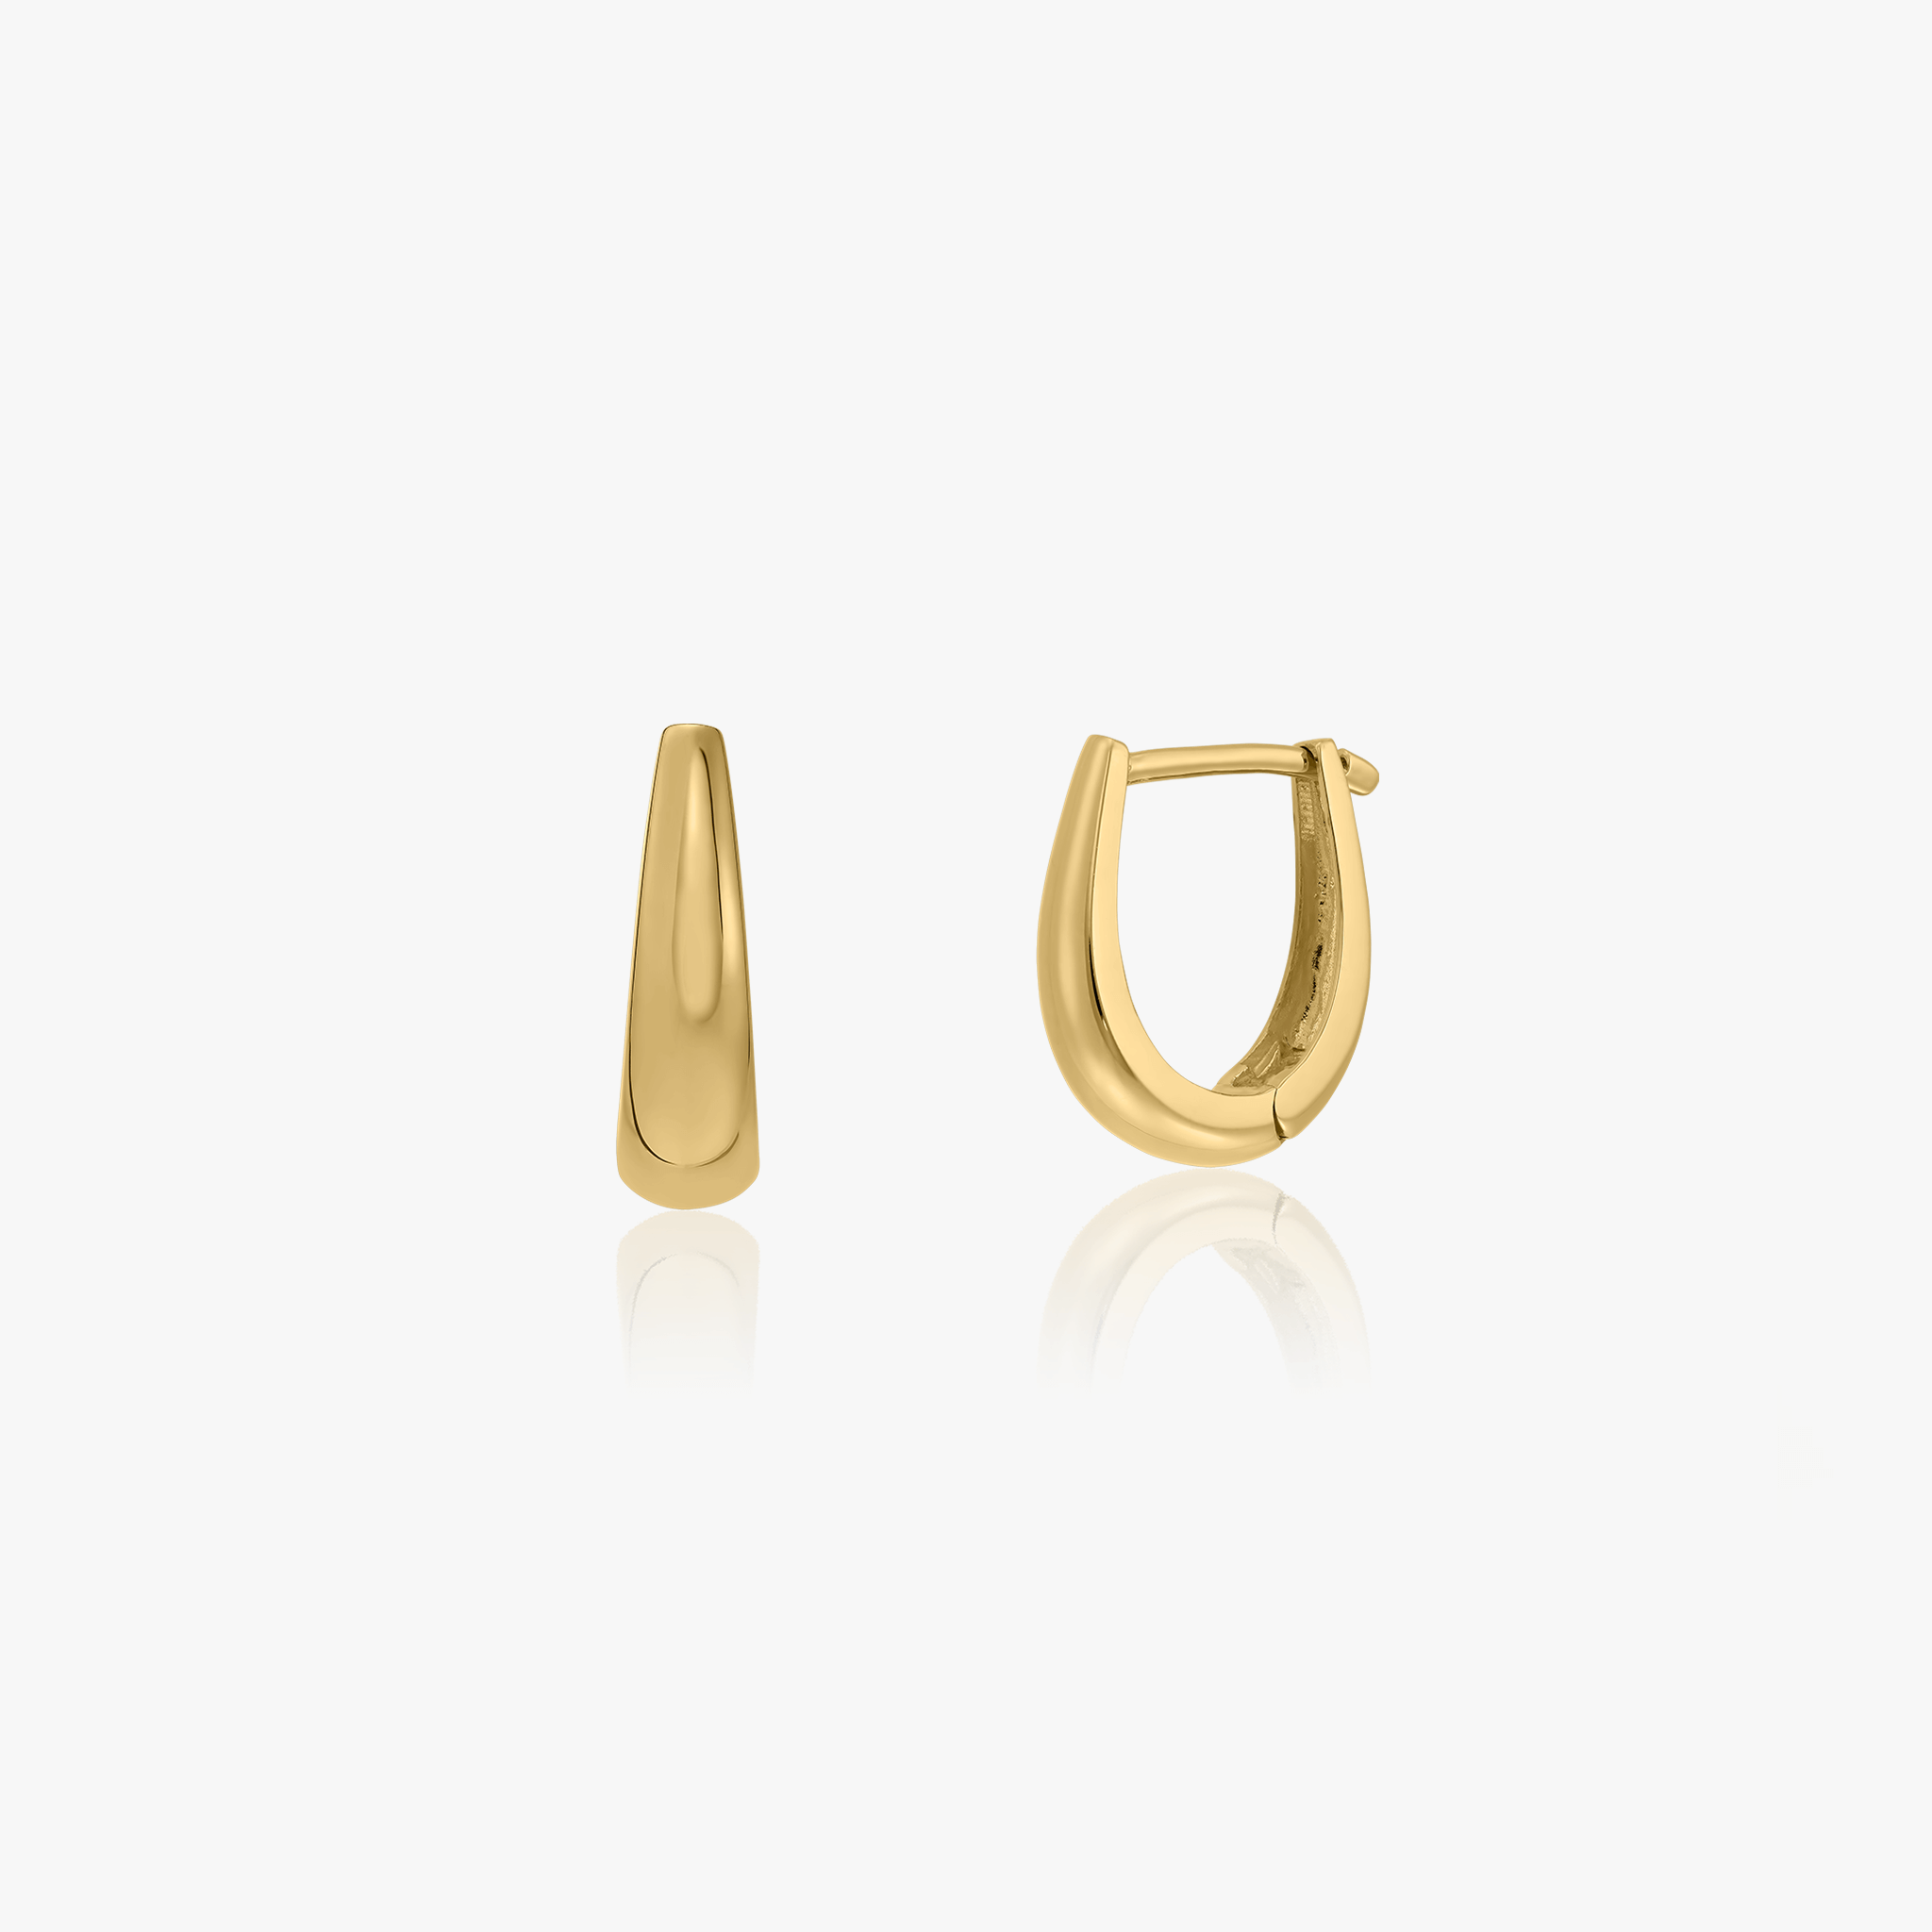 Dome gold earrings